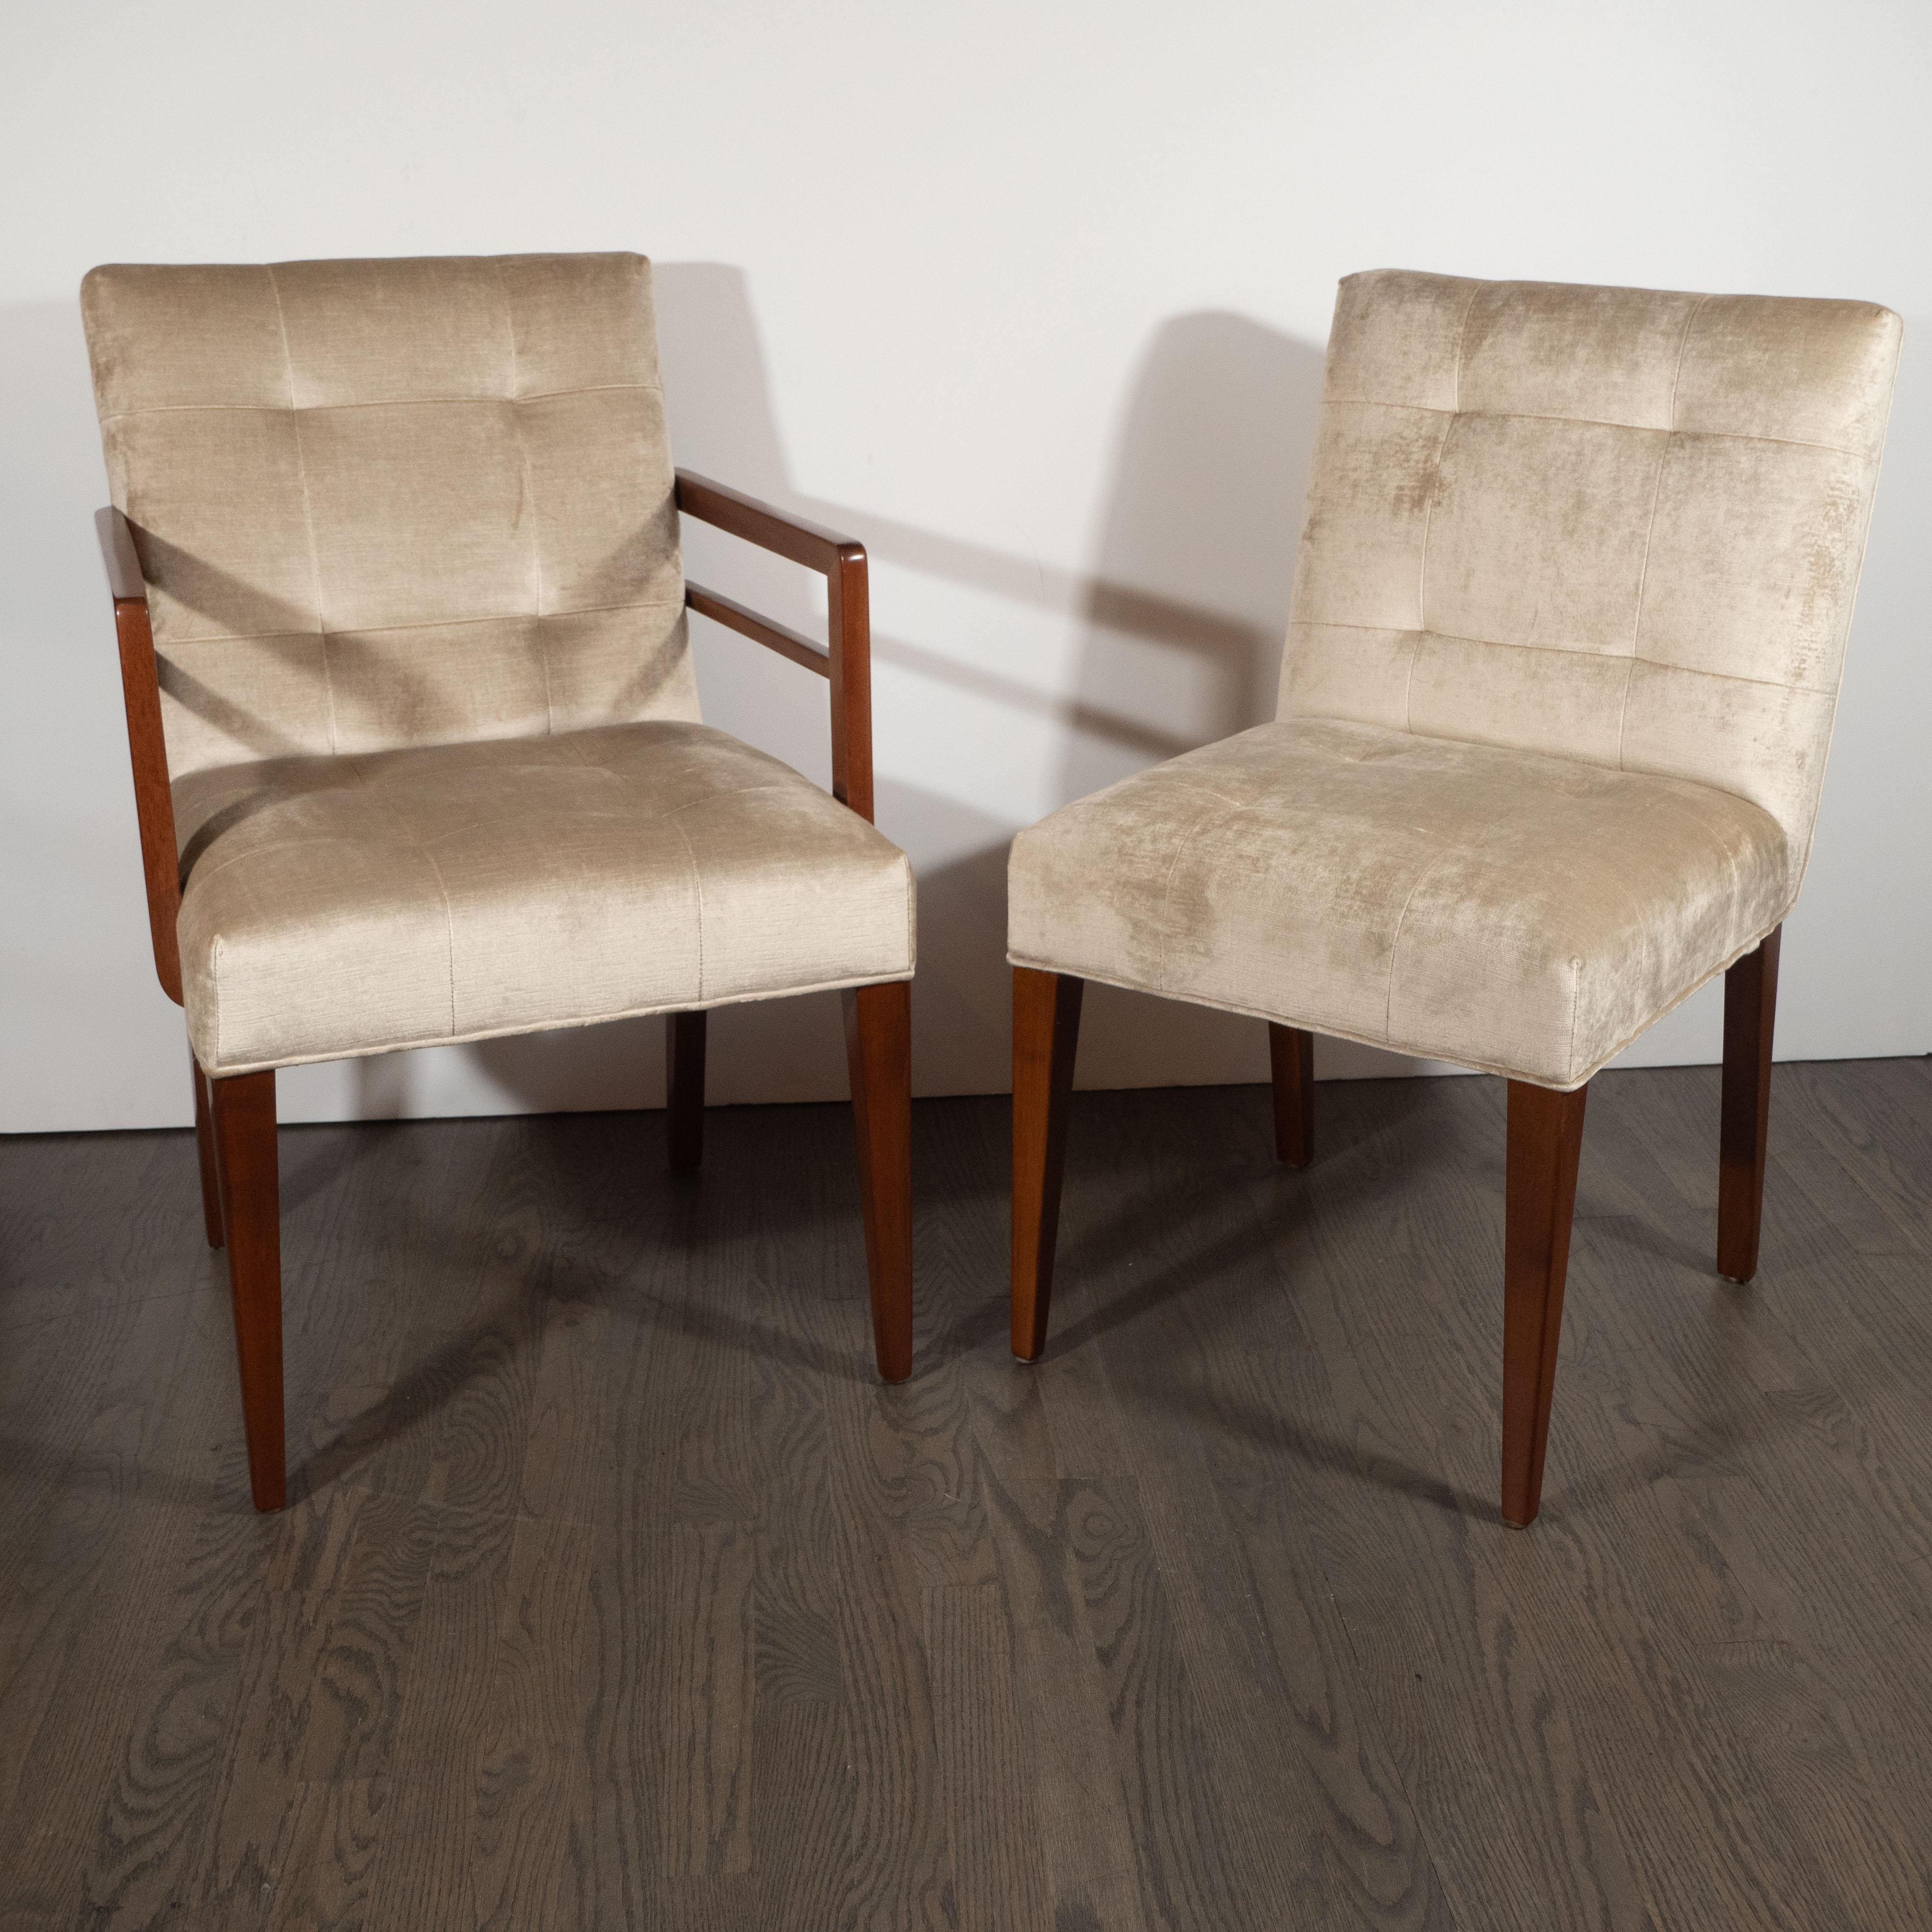 This stunning and important set of eight dining chairs were crafted in the United States by Gilbert Rohde- one of the most influential and celebrated designers of the 20th century, and a forefather of modernism, circa 1940. The set features two arm